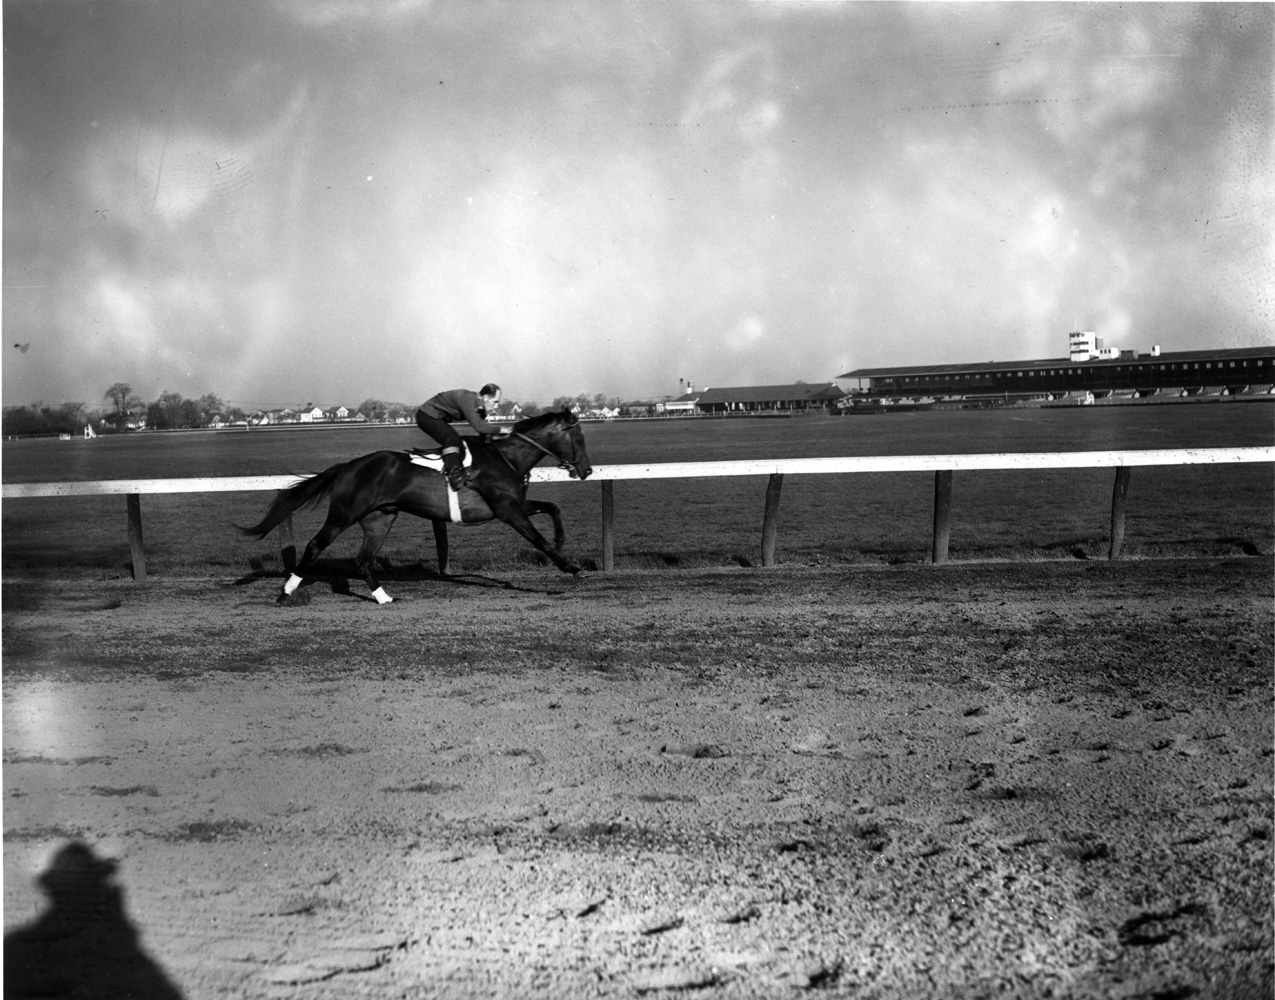 Coaltown working out at Jamaica Racetrack, April 1949 (Keeneland Library Morgan Collection/Museum Collection)